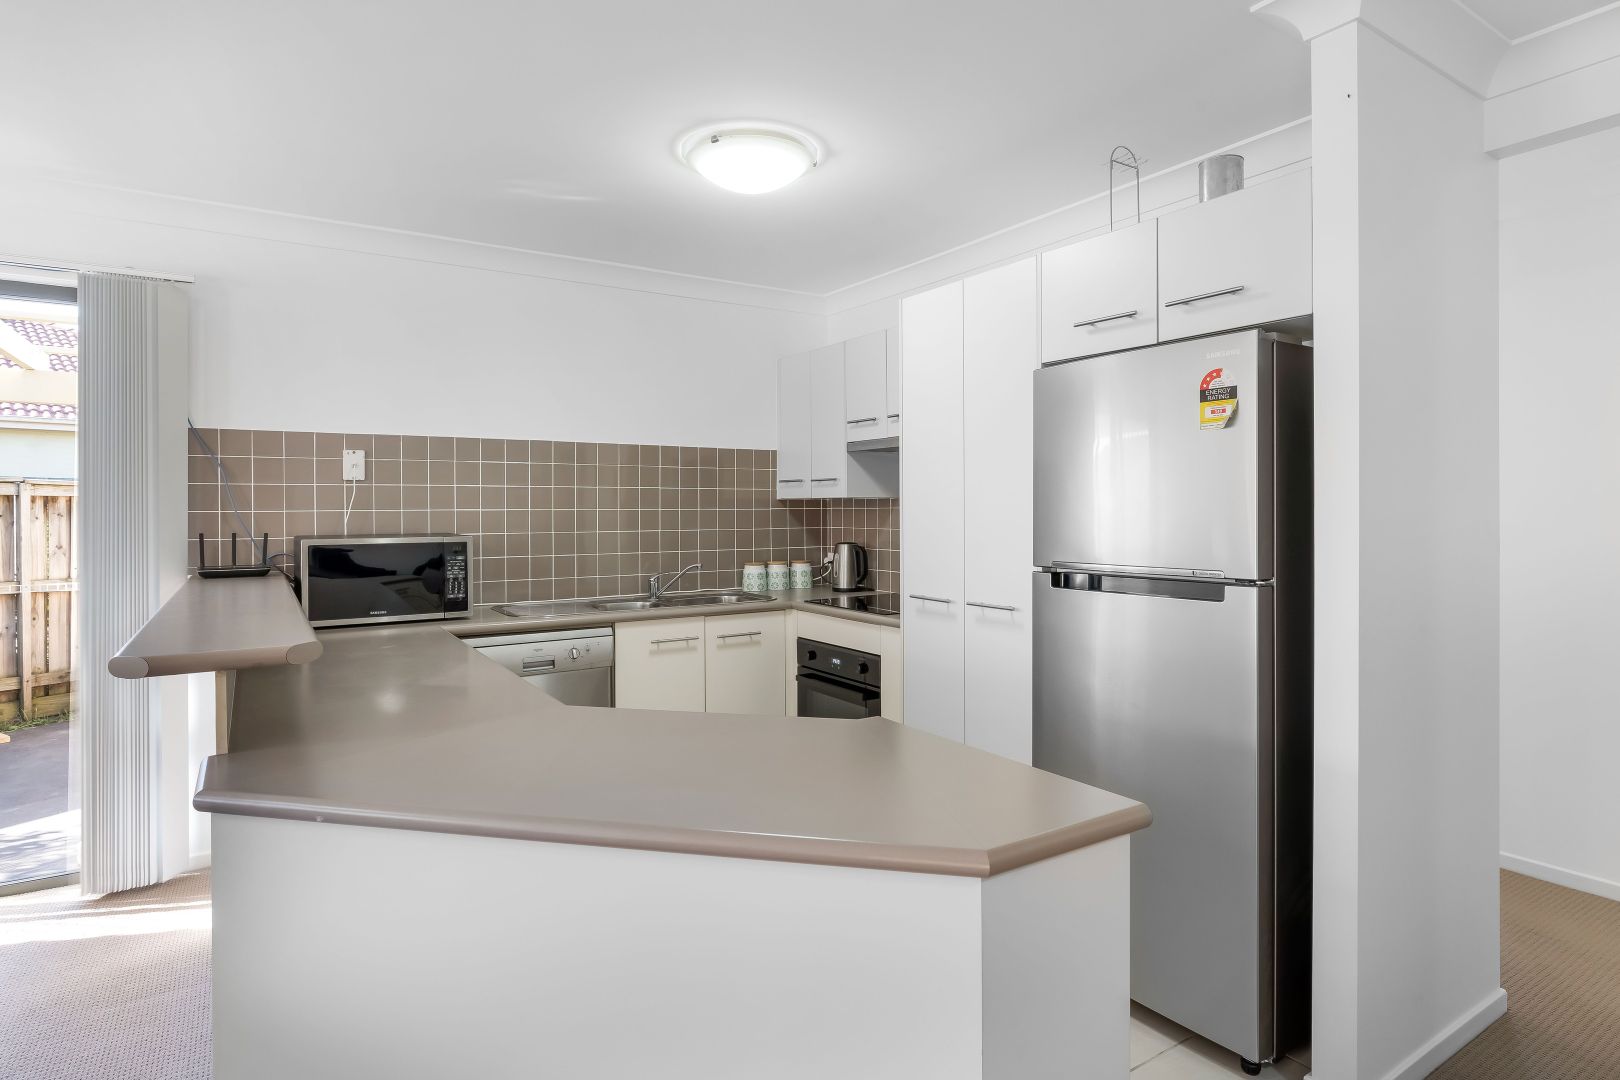 8/12 Denton Park Drive, Rutherford NSW 2320, Image 2